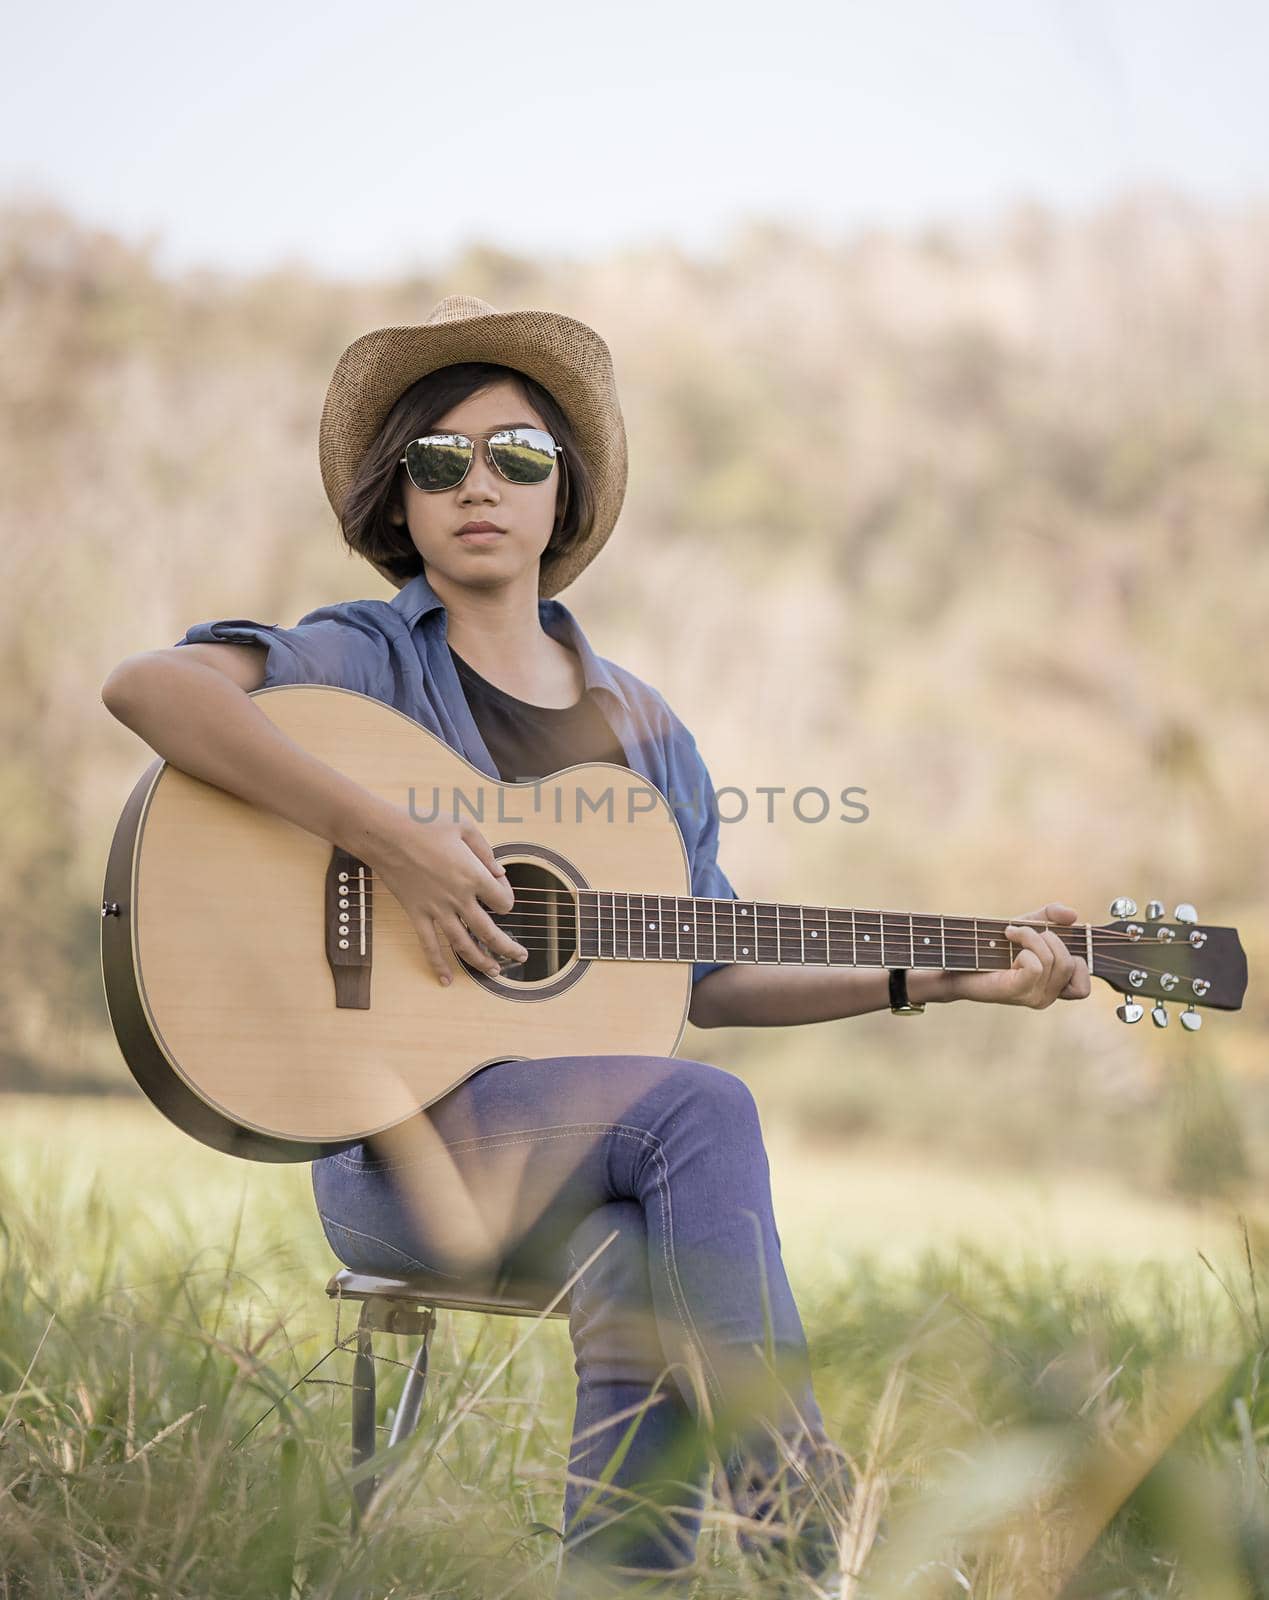 Women short hair wear hat and sunglasses sit playing guitar in grass field  by stoonn